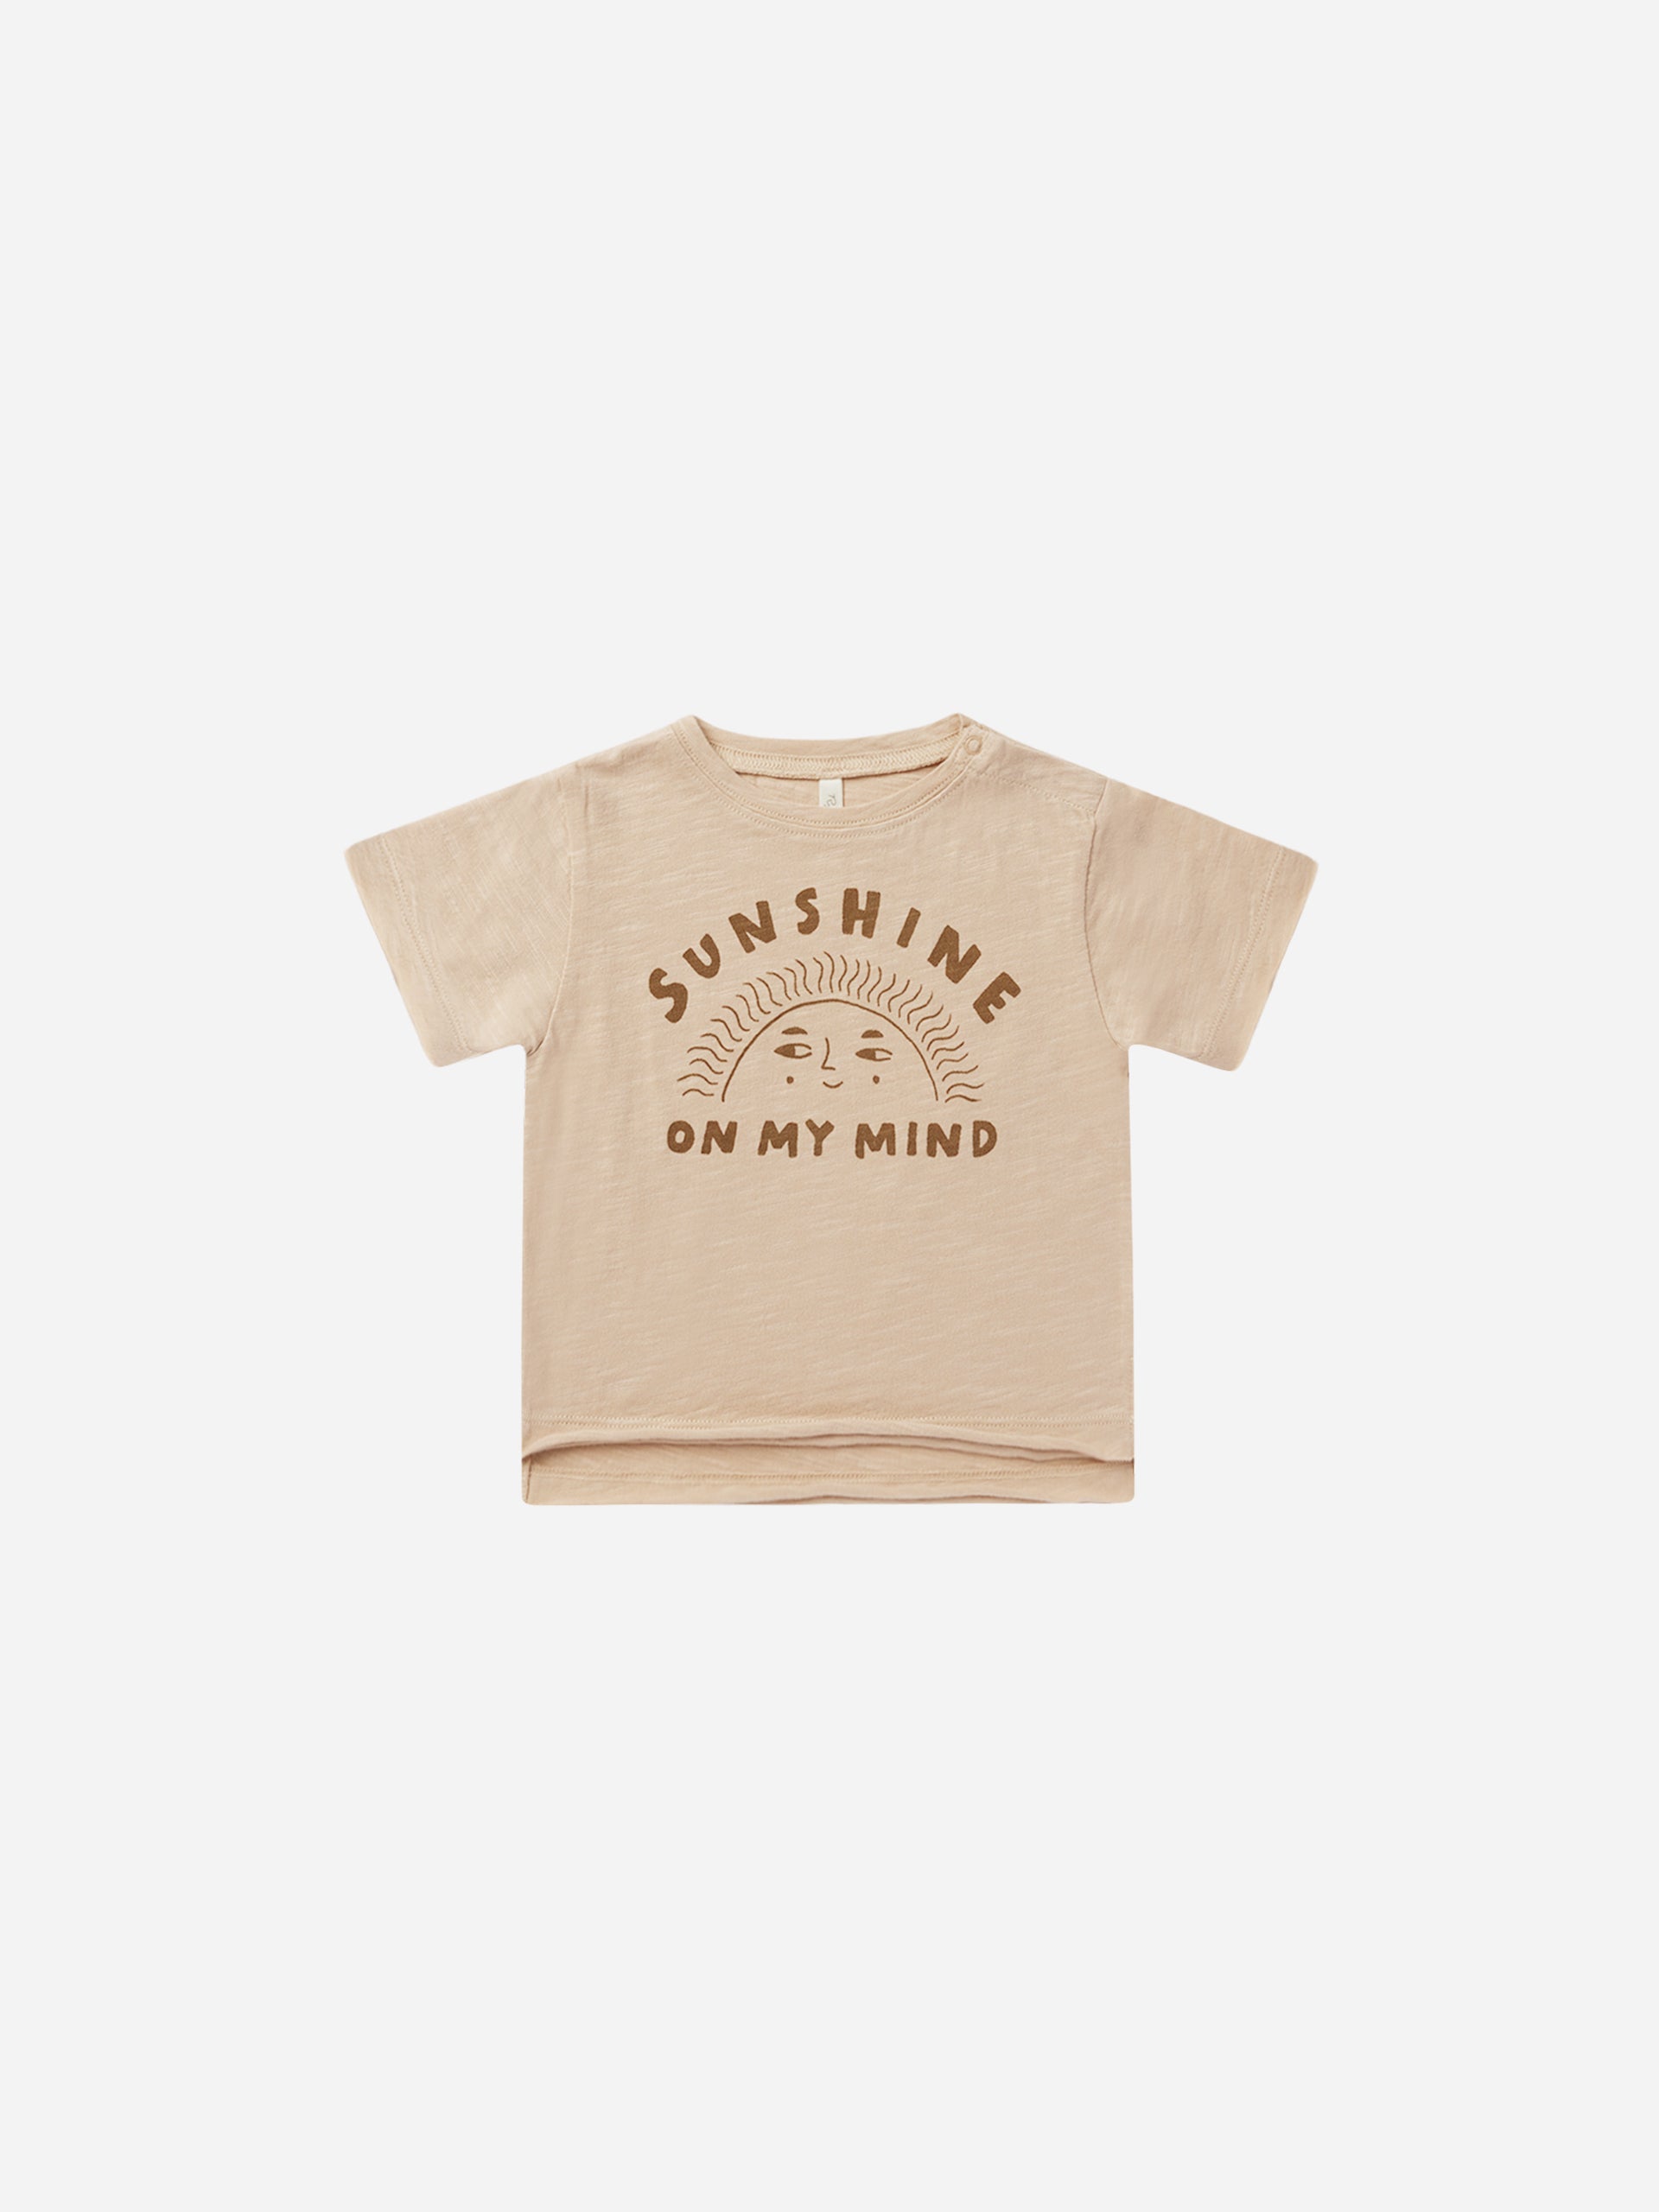 Raw Edge Tee || Sunshine On My Mind - Rylee + Cru | Kids Clothes | Trendy Baby Clothes | Modern Infant Outfits |